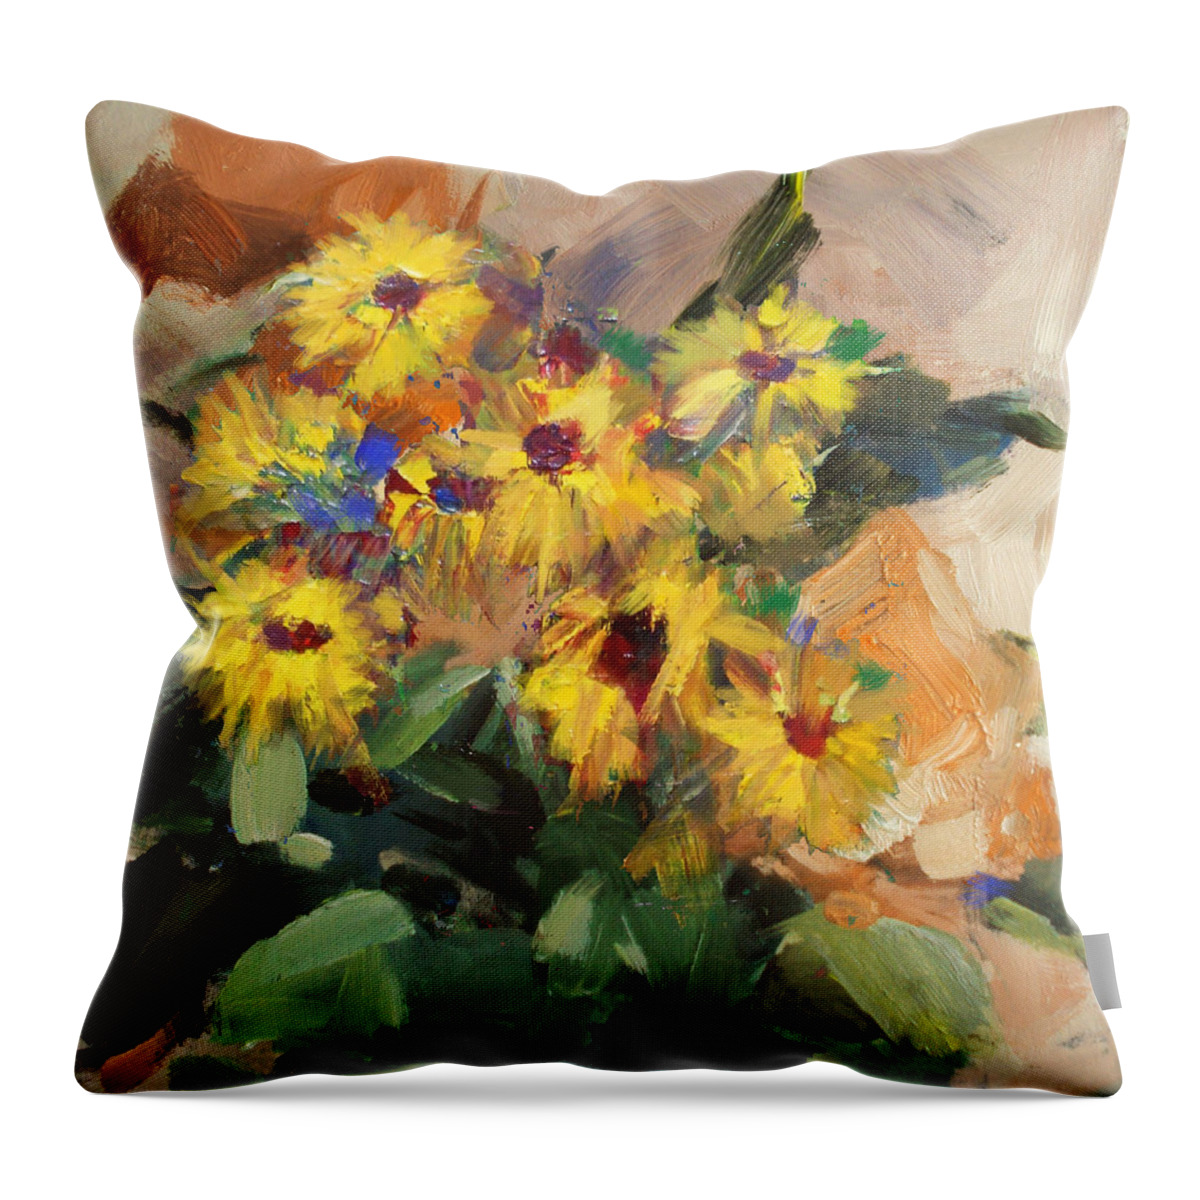 Flower Throw Pillow featuring the painting Floral 15 by Mahnoor Shah